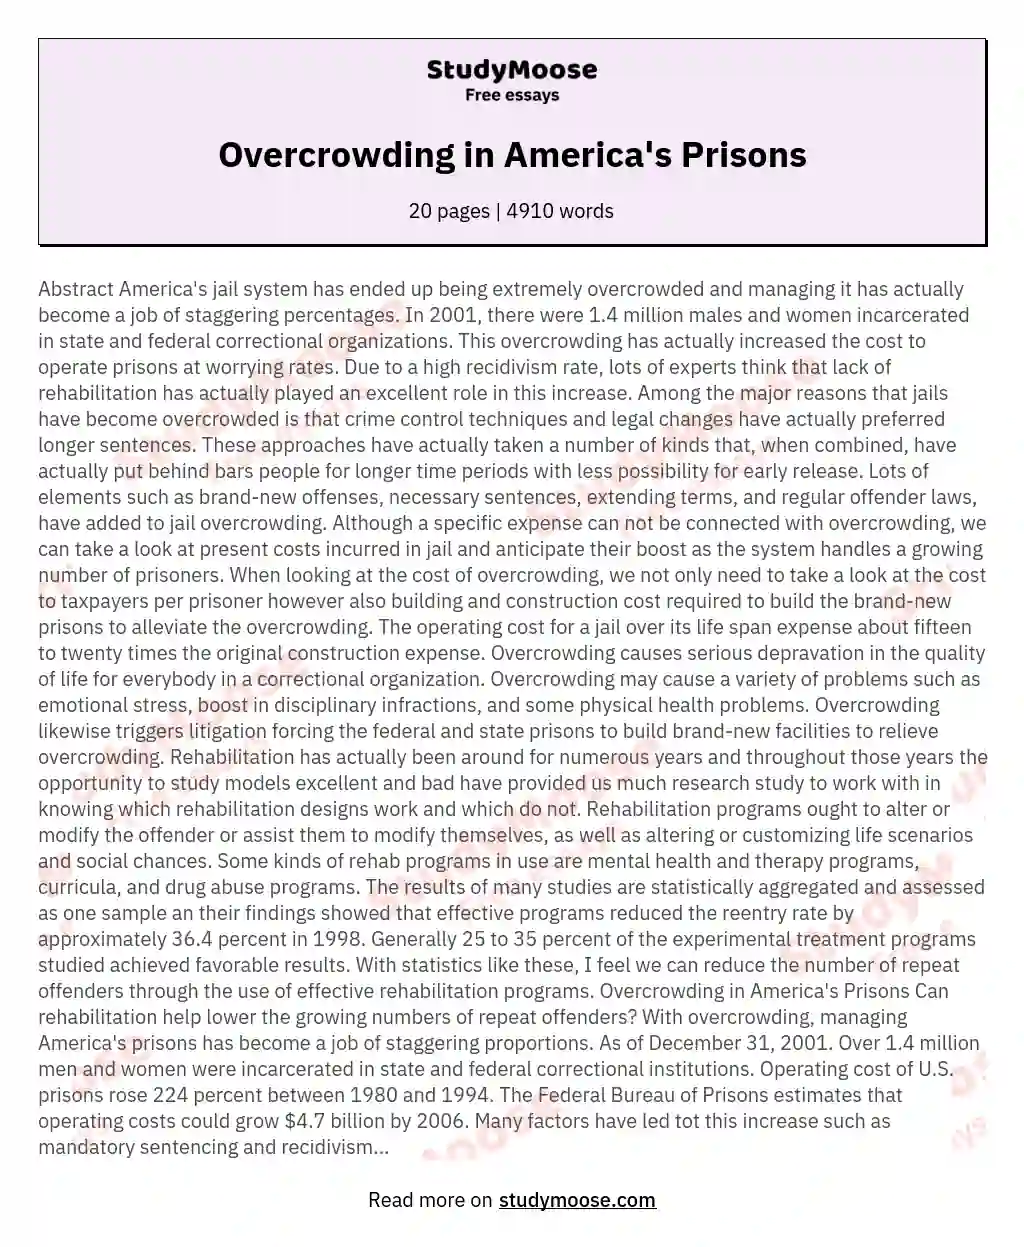 Overcrowding in America's Prisons essay